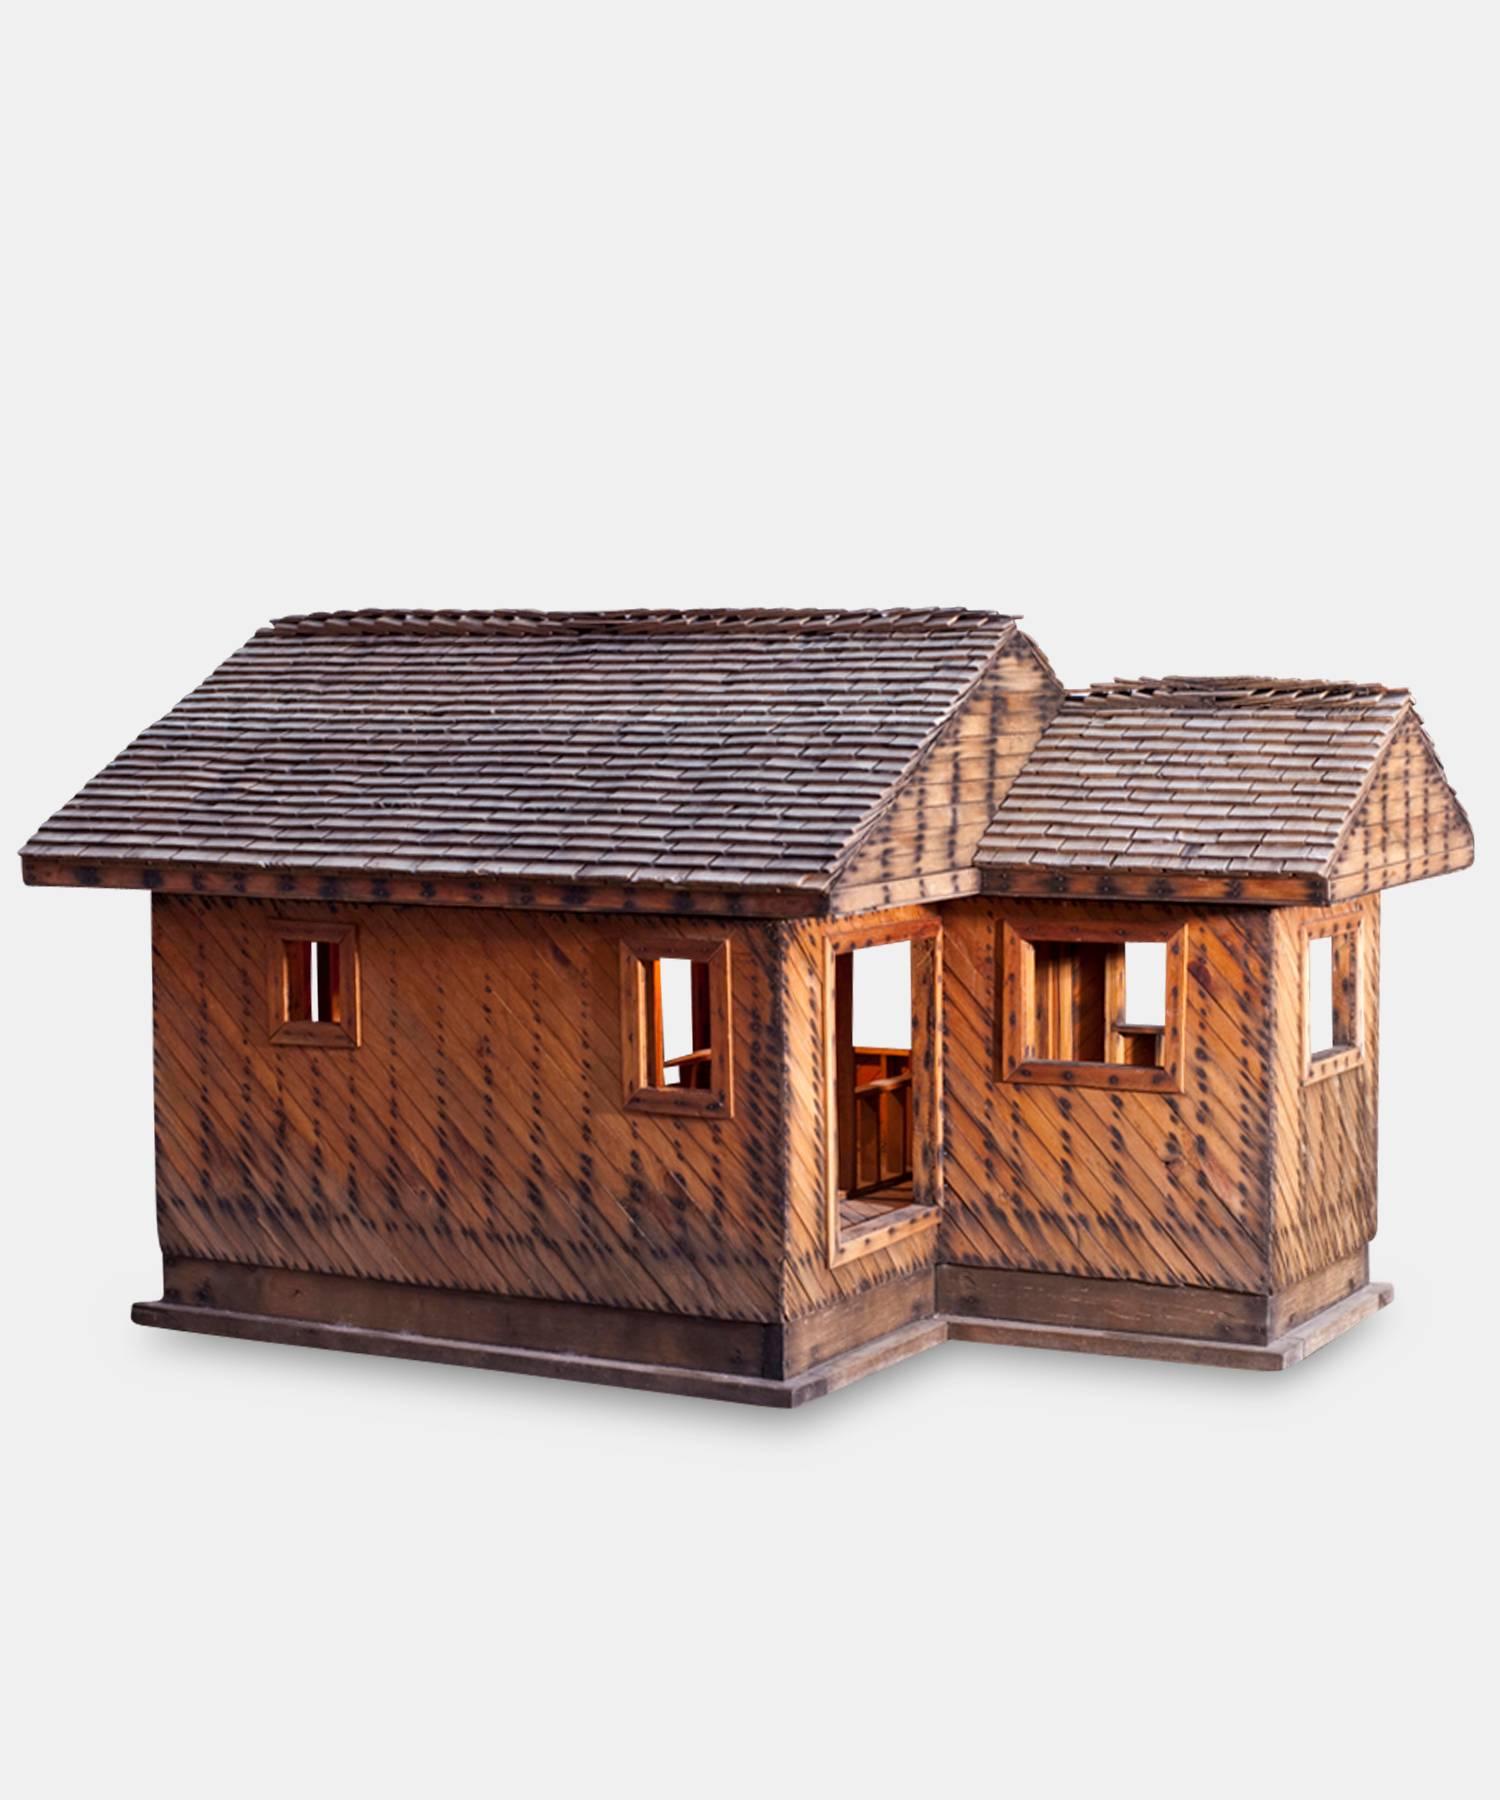 A model home used in either an architecture firm or classroom, with simple construction and a detachable roof.

Made in America, circa 1920.